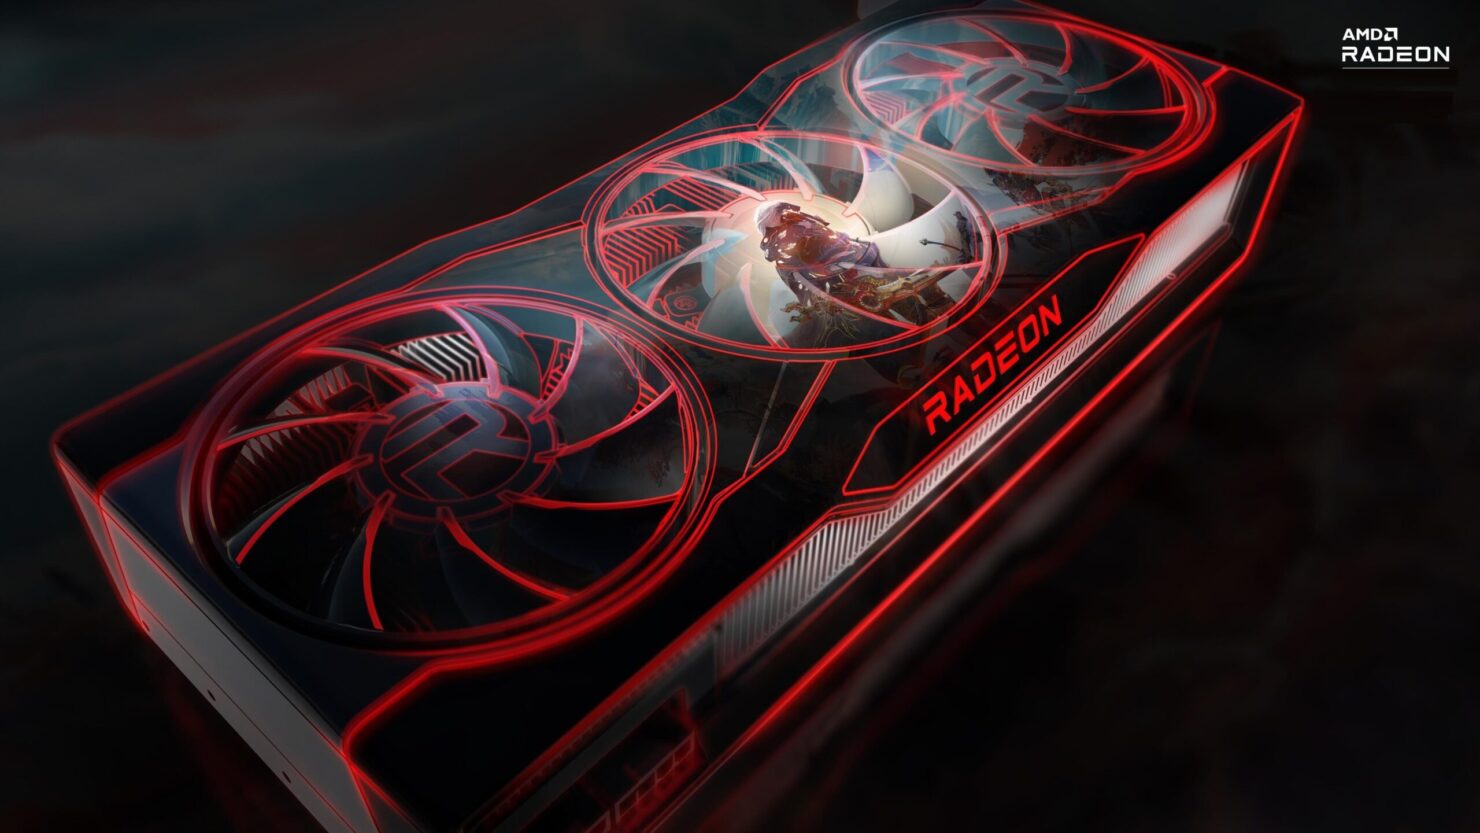 AMD Radeon RX 7950 XT with 15360 RDNA 3 Cores, Massive 32 GB RAM, 512 MB Unlimited Cache and up to 2.5 GHz Clock, 500W TBP